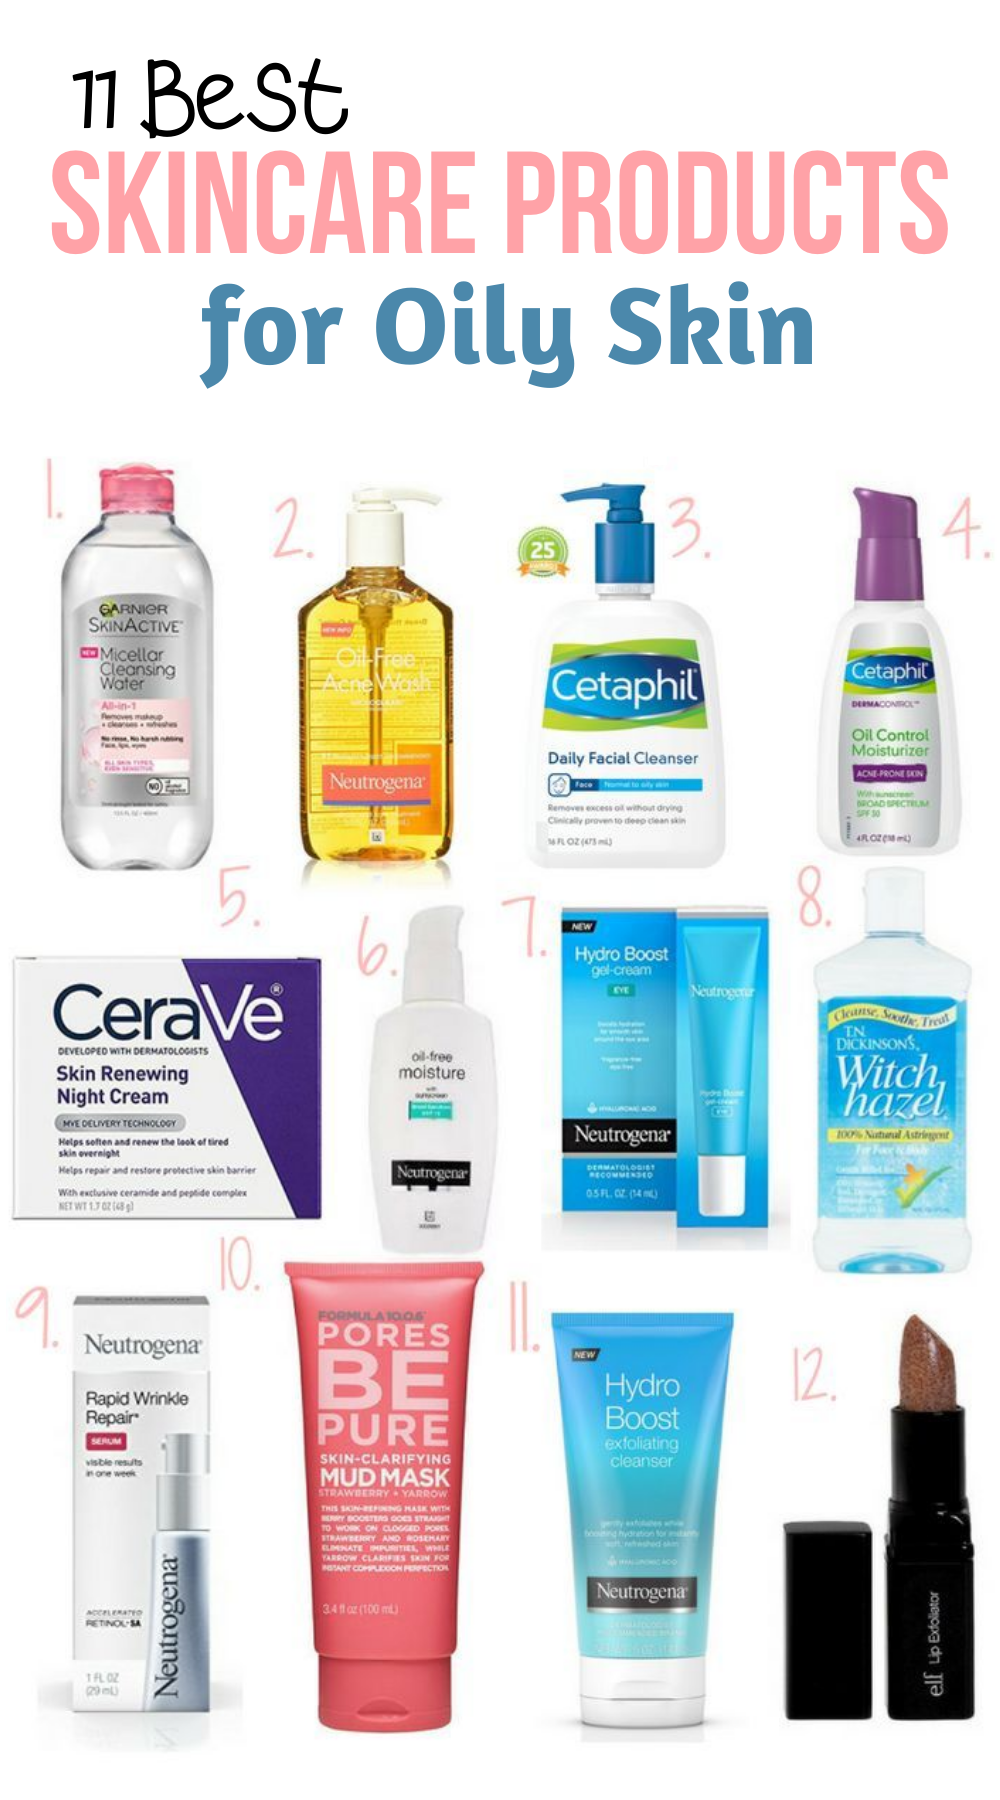 11 Of The Best Skincare Products For Oily Skin: Learn More! -   17 skin care Serum products ideas